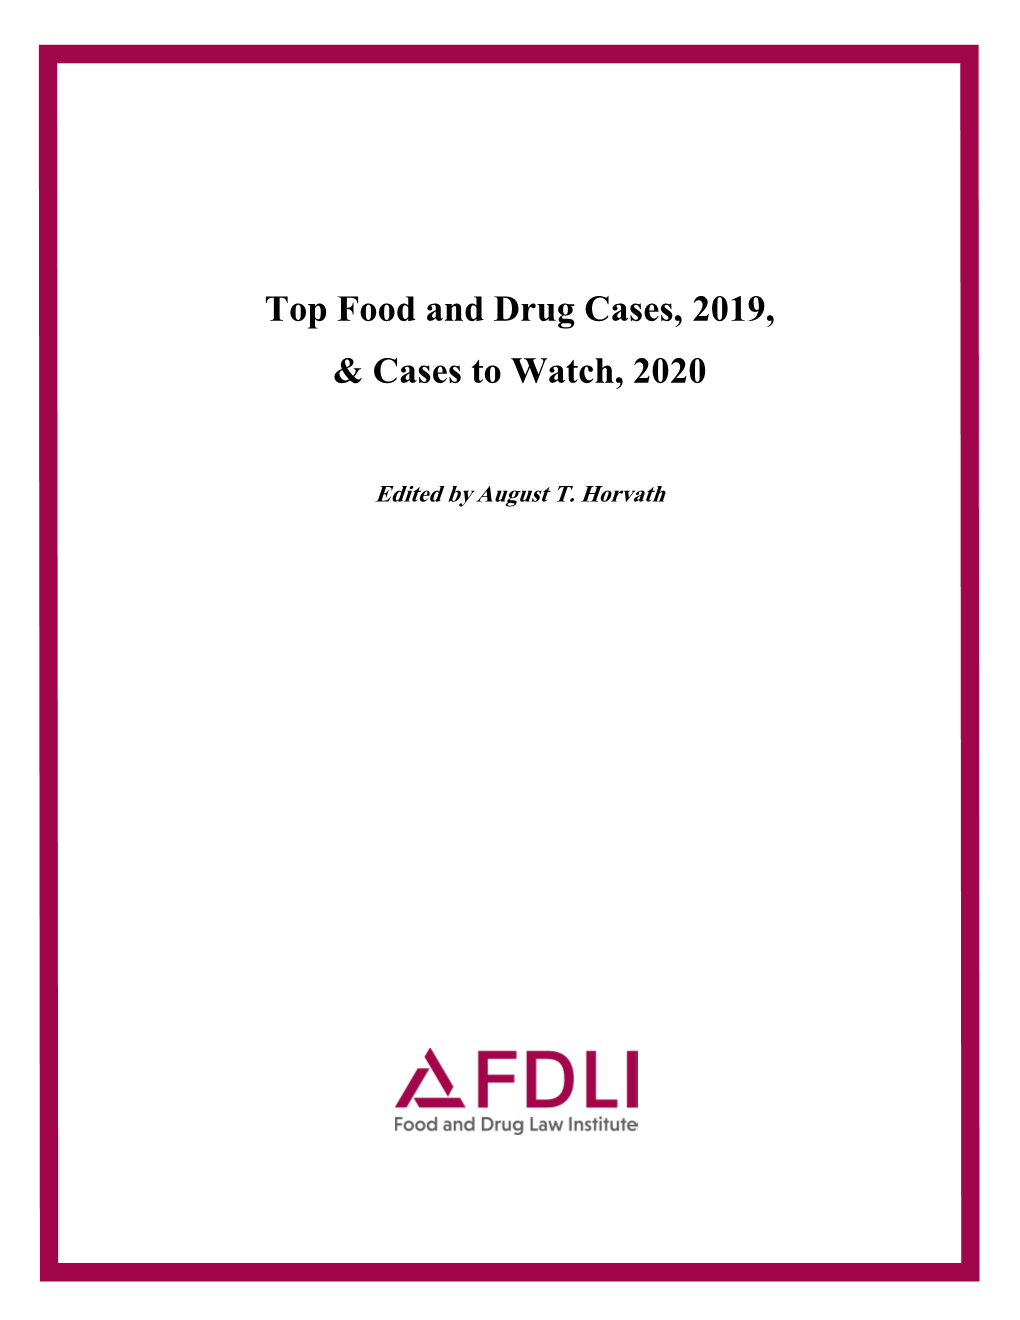 Top Food and Drug Cases, 2019, & Cases to Watch, 2020